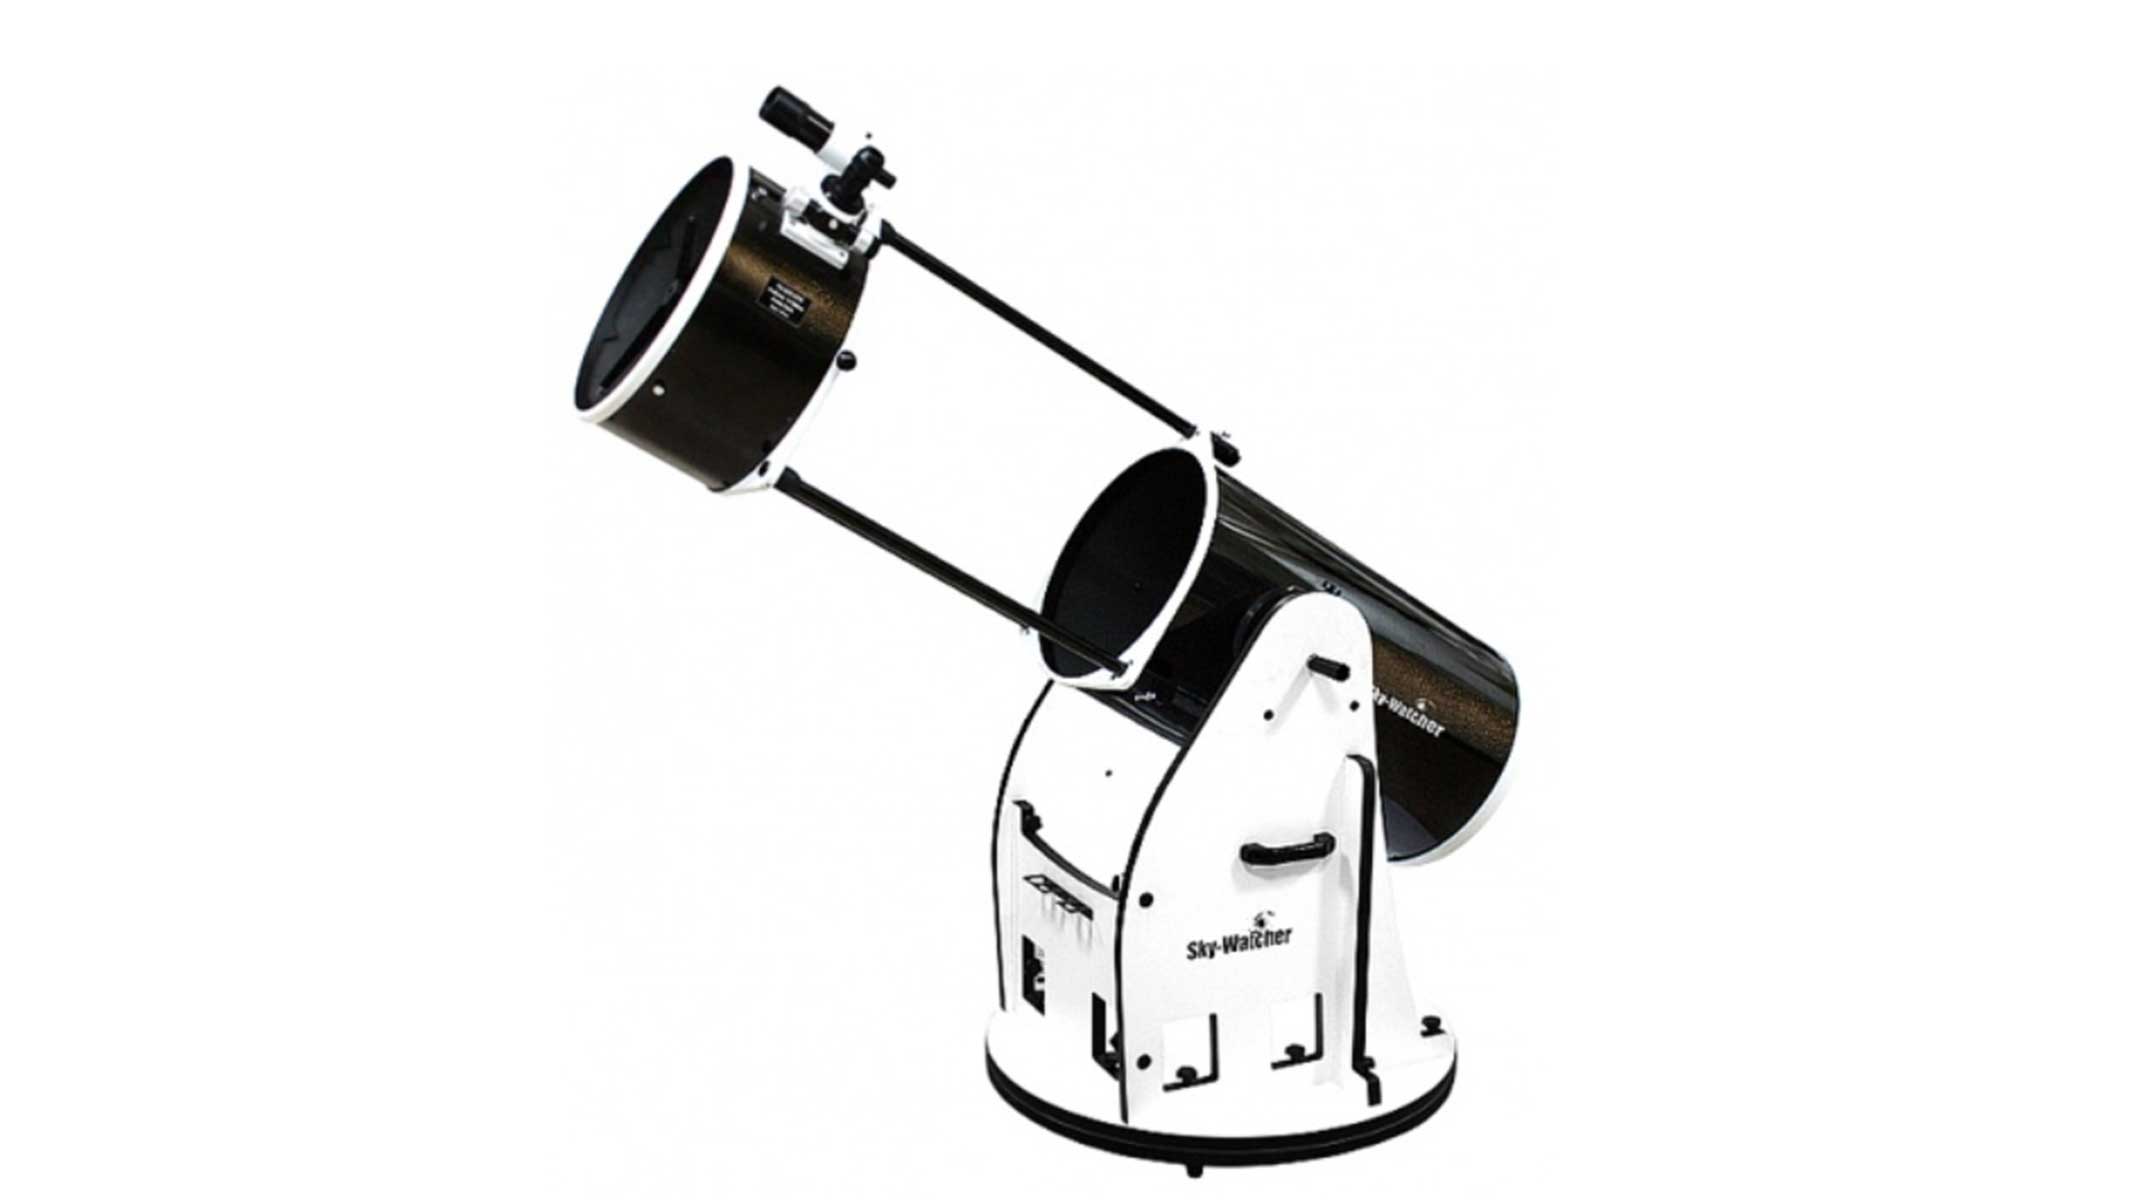 Skywatcher synscan 400p Dobsonian telescope image product